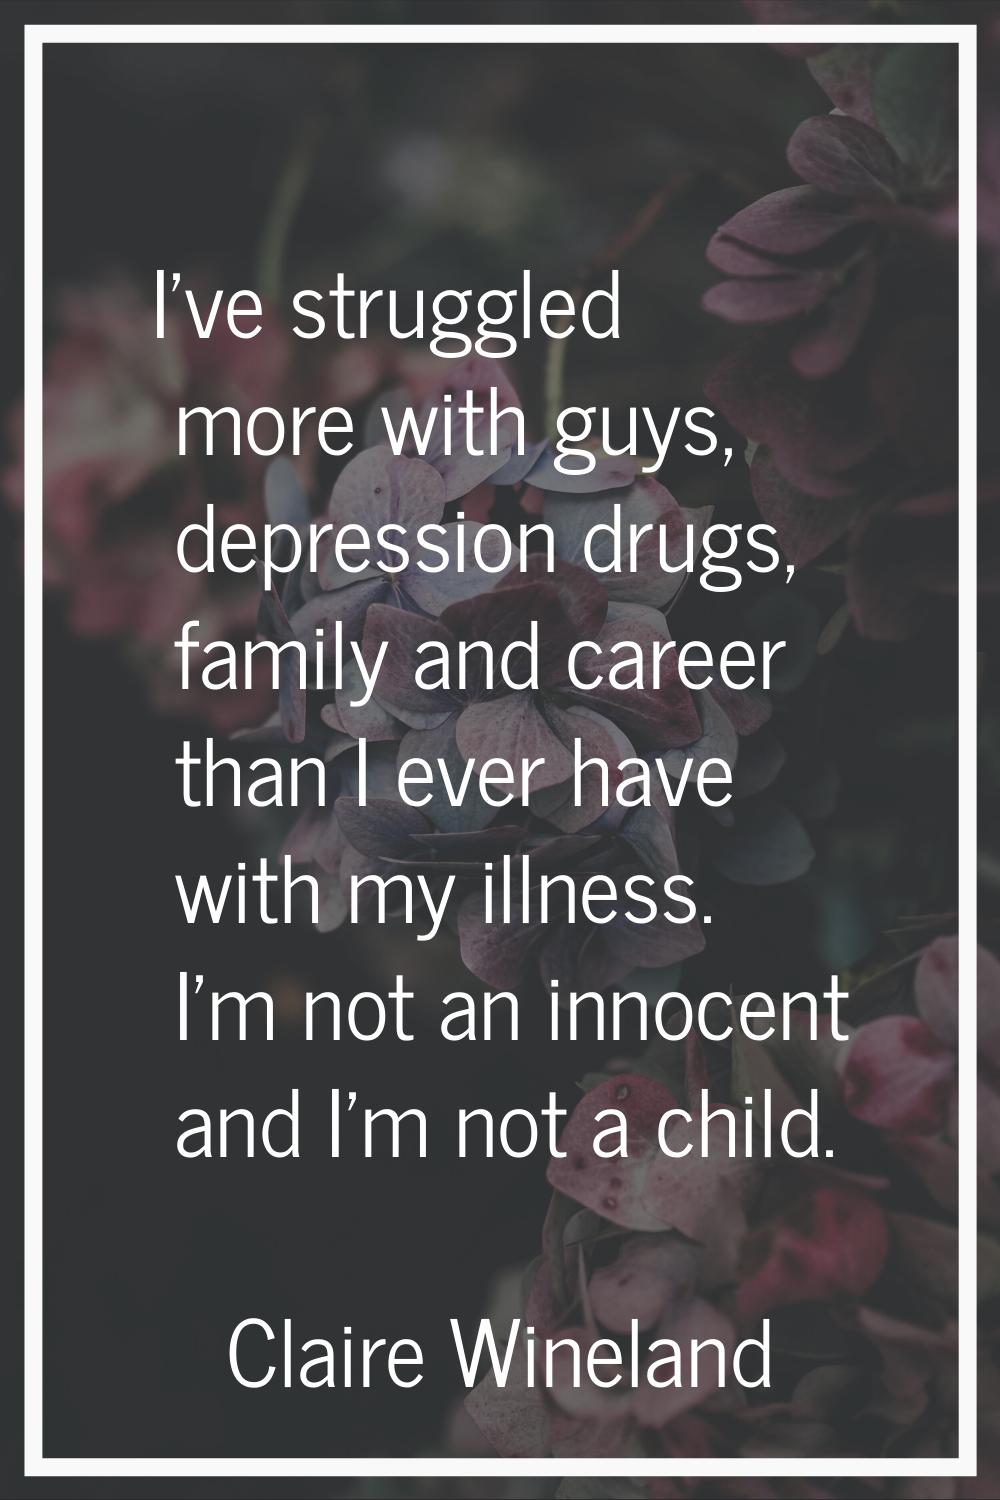 I've struggled more with guys, depression drugs, family and career than I ever have with my illness